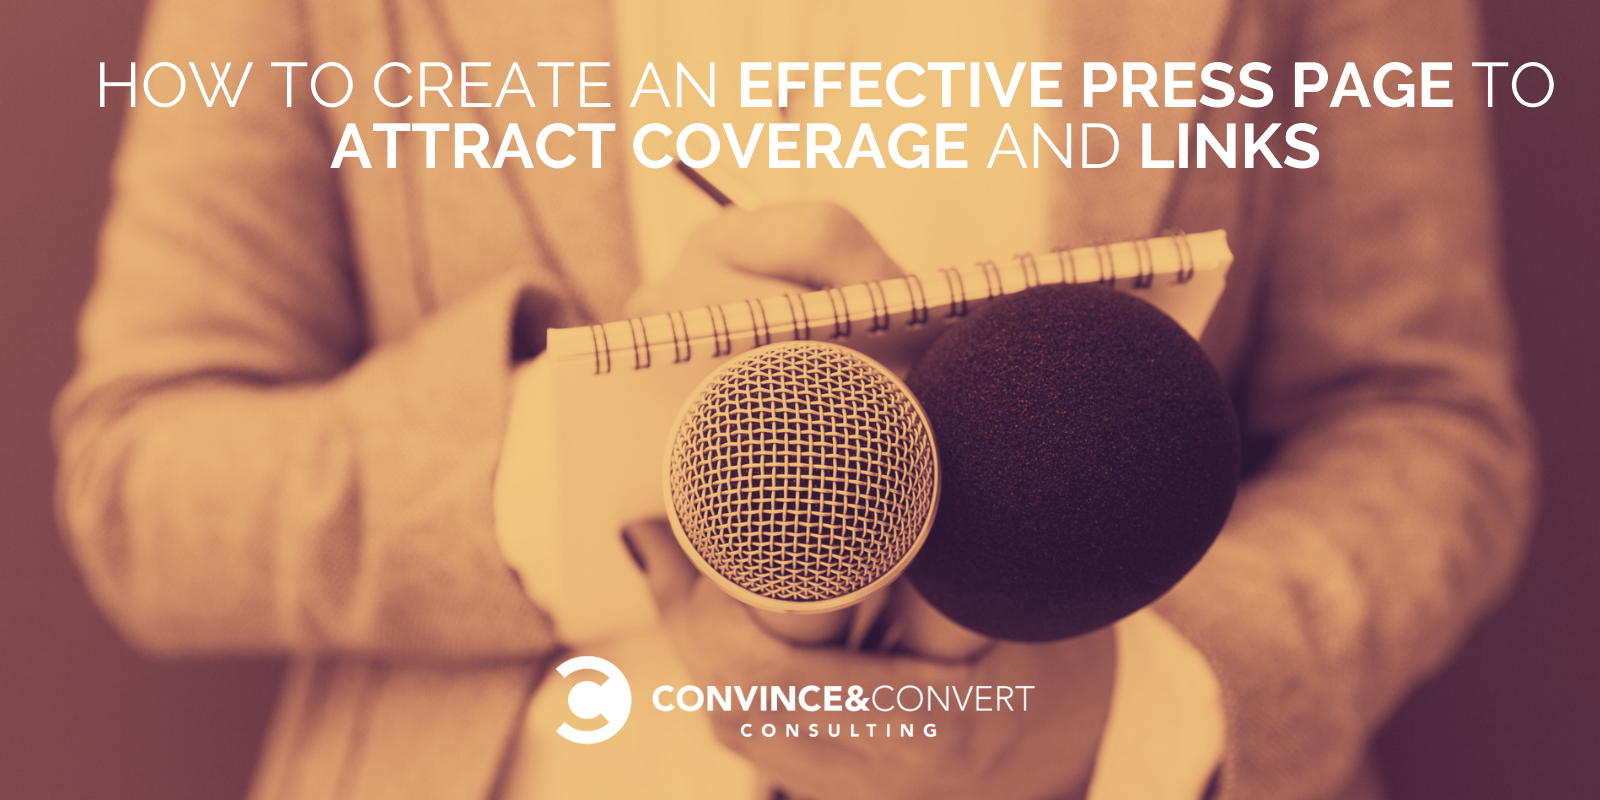 How to Create an Effective Press Page to Attract Coverage and Links